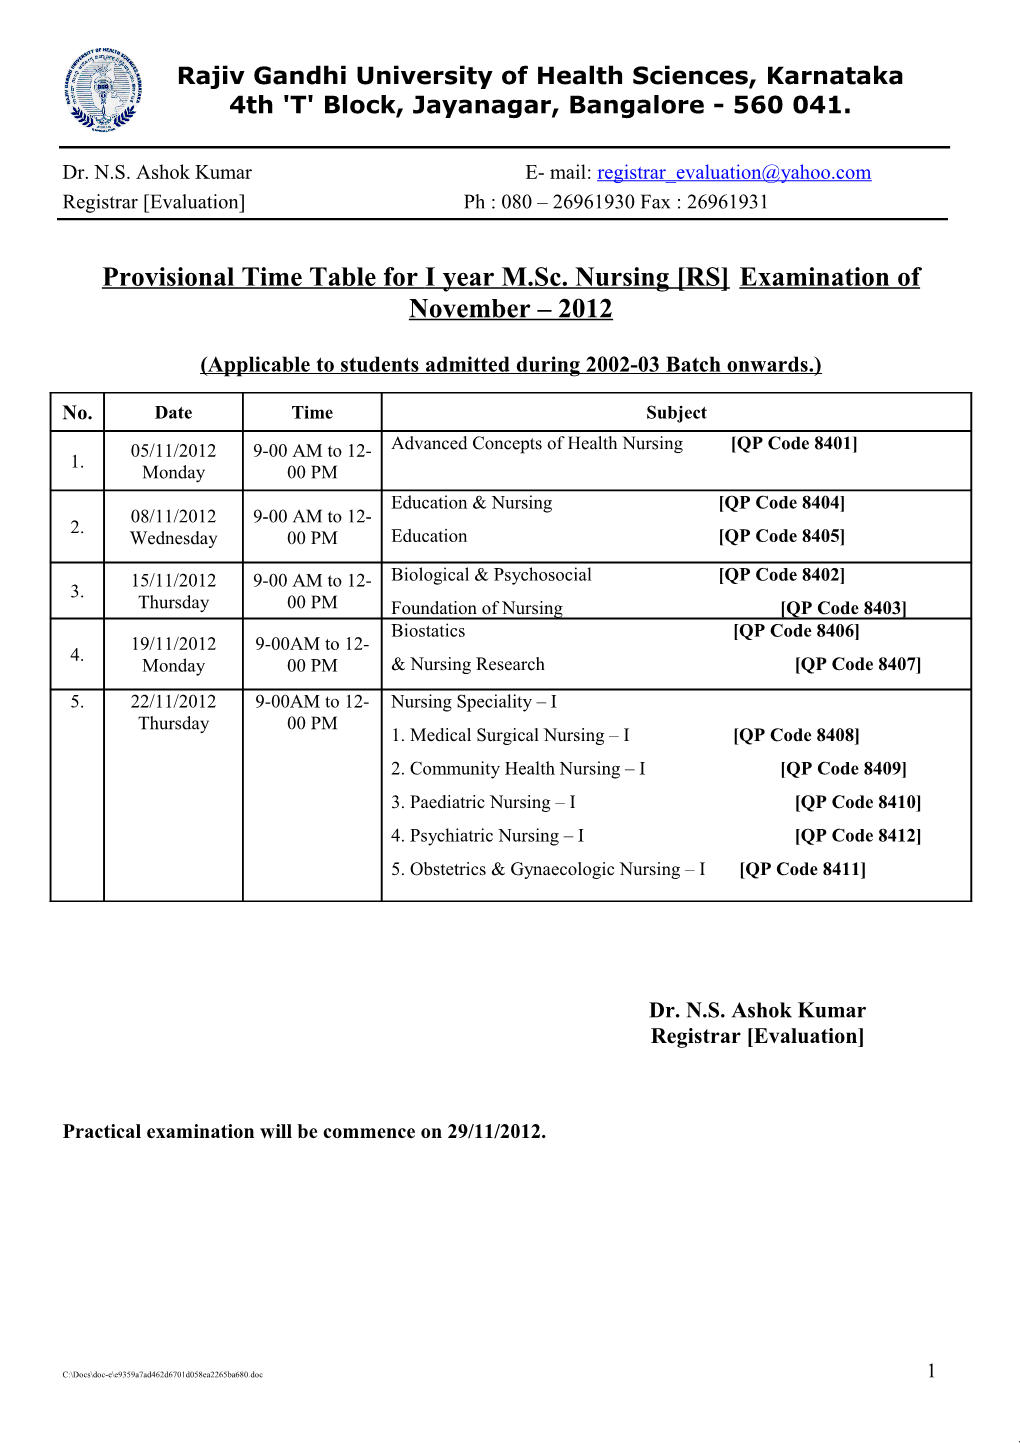 Provisional Time Table for I Year M.Sc. Nursing RS Examination of November 2012